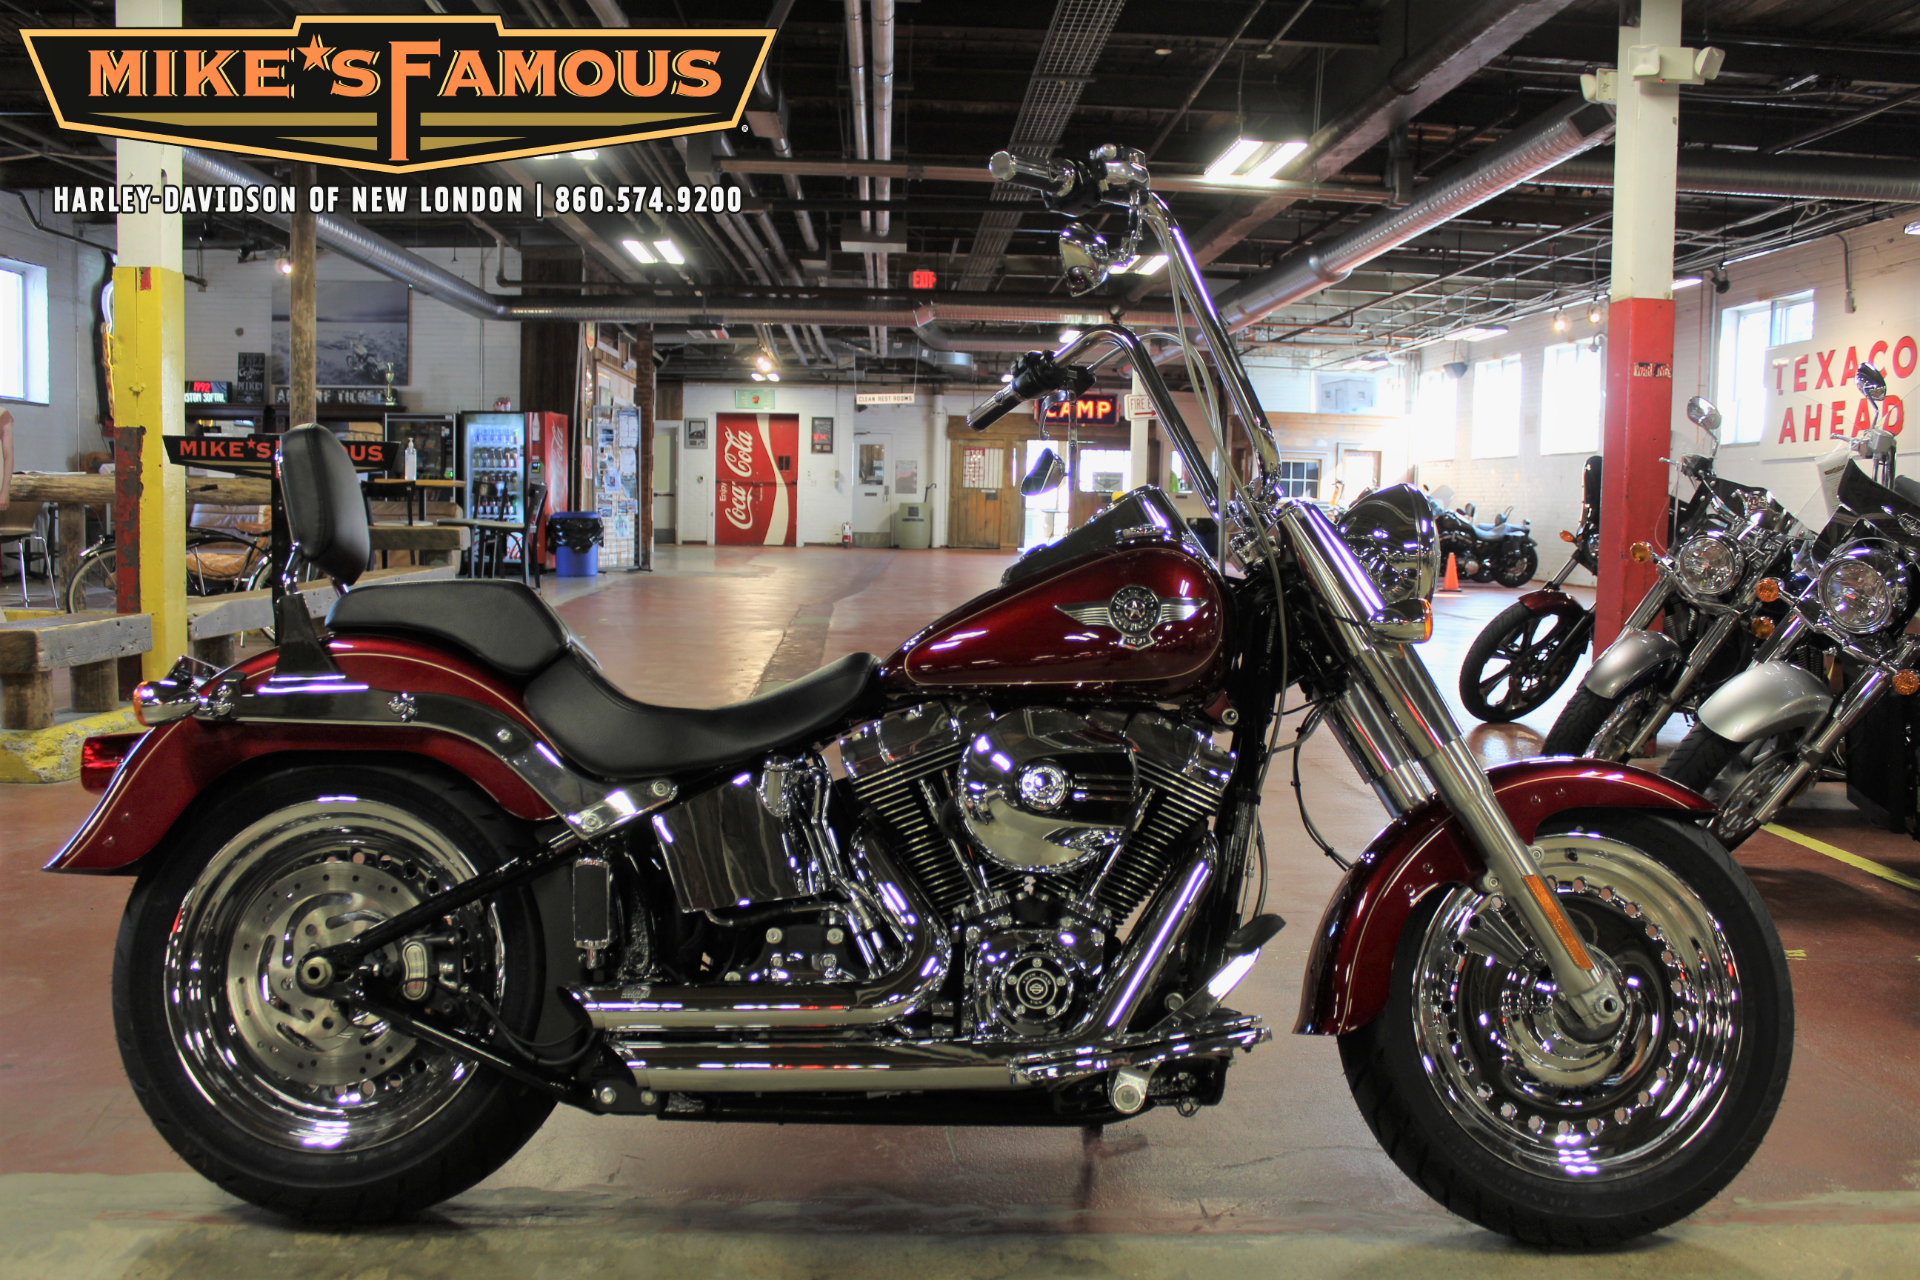 Used 2016 Harley Davidson Fat Boy Velocity Red Sunglo Motorcycles In New London Ct T17953